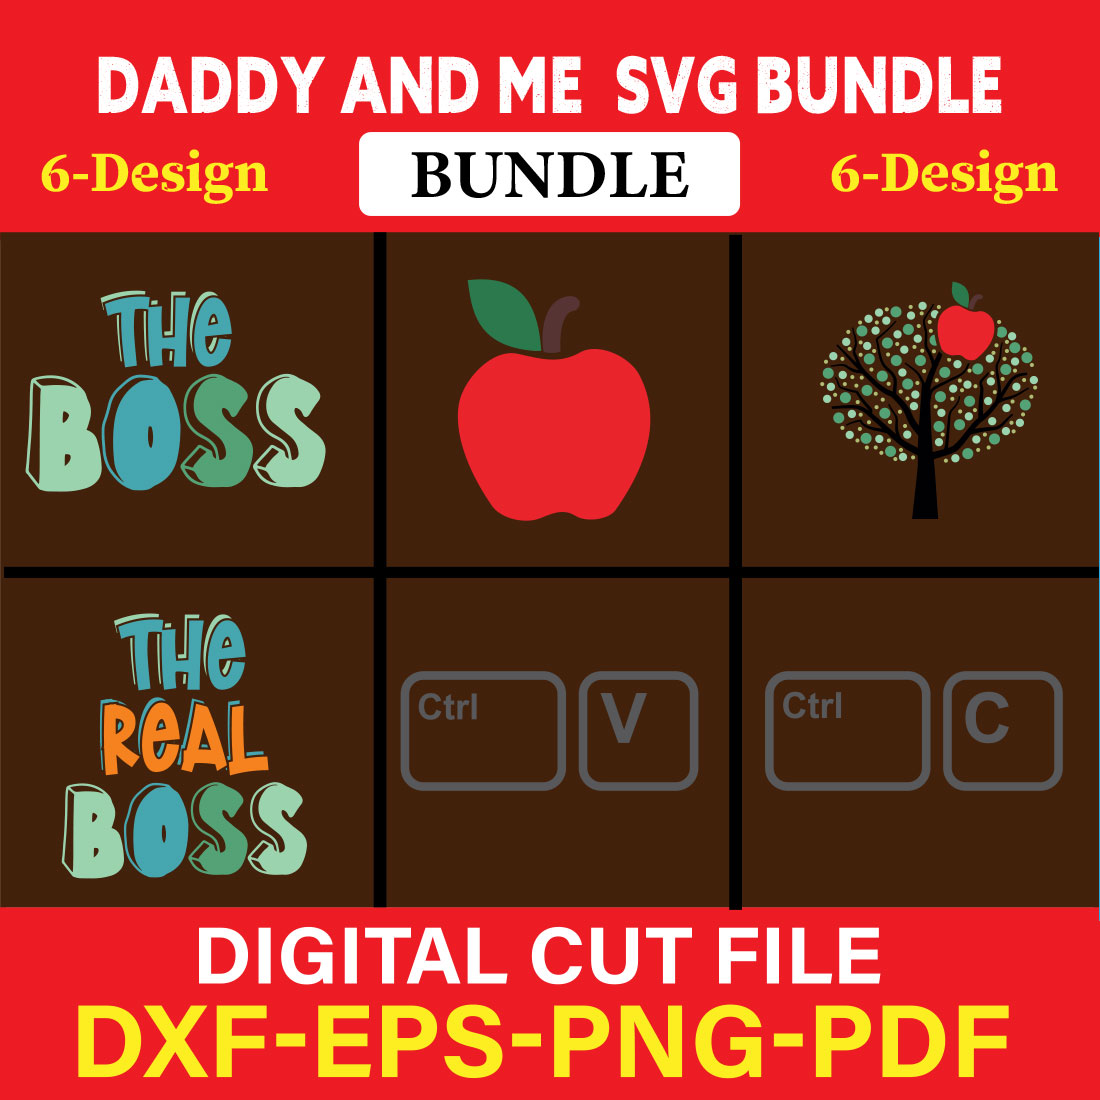 Daddy And Me T-shirt Design Bundle Vol-4 cover image.